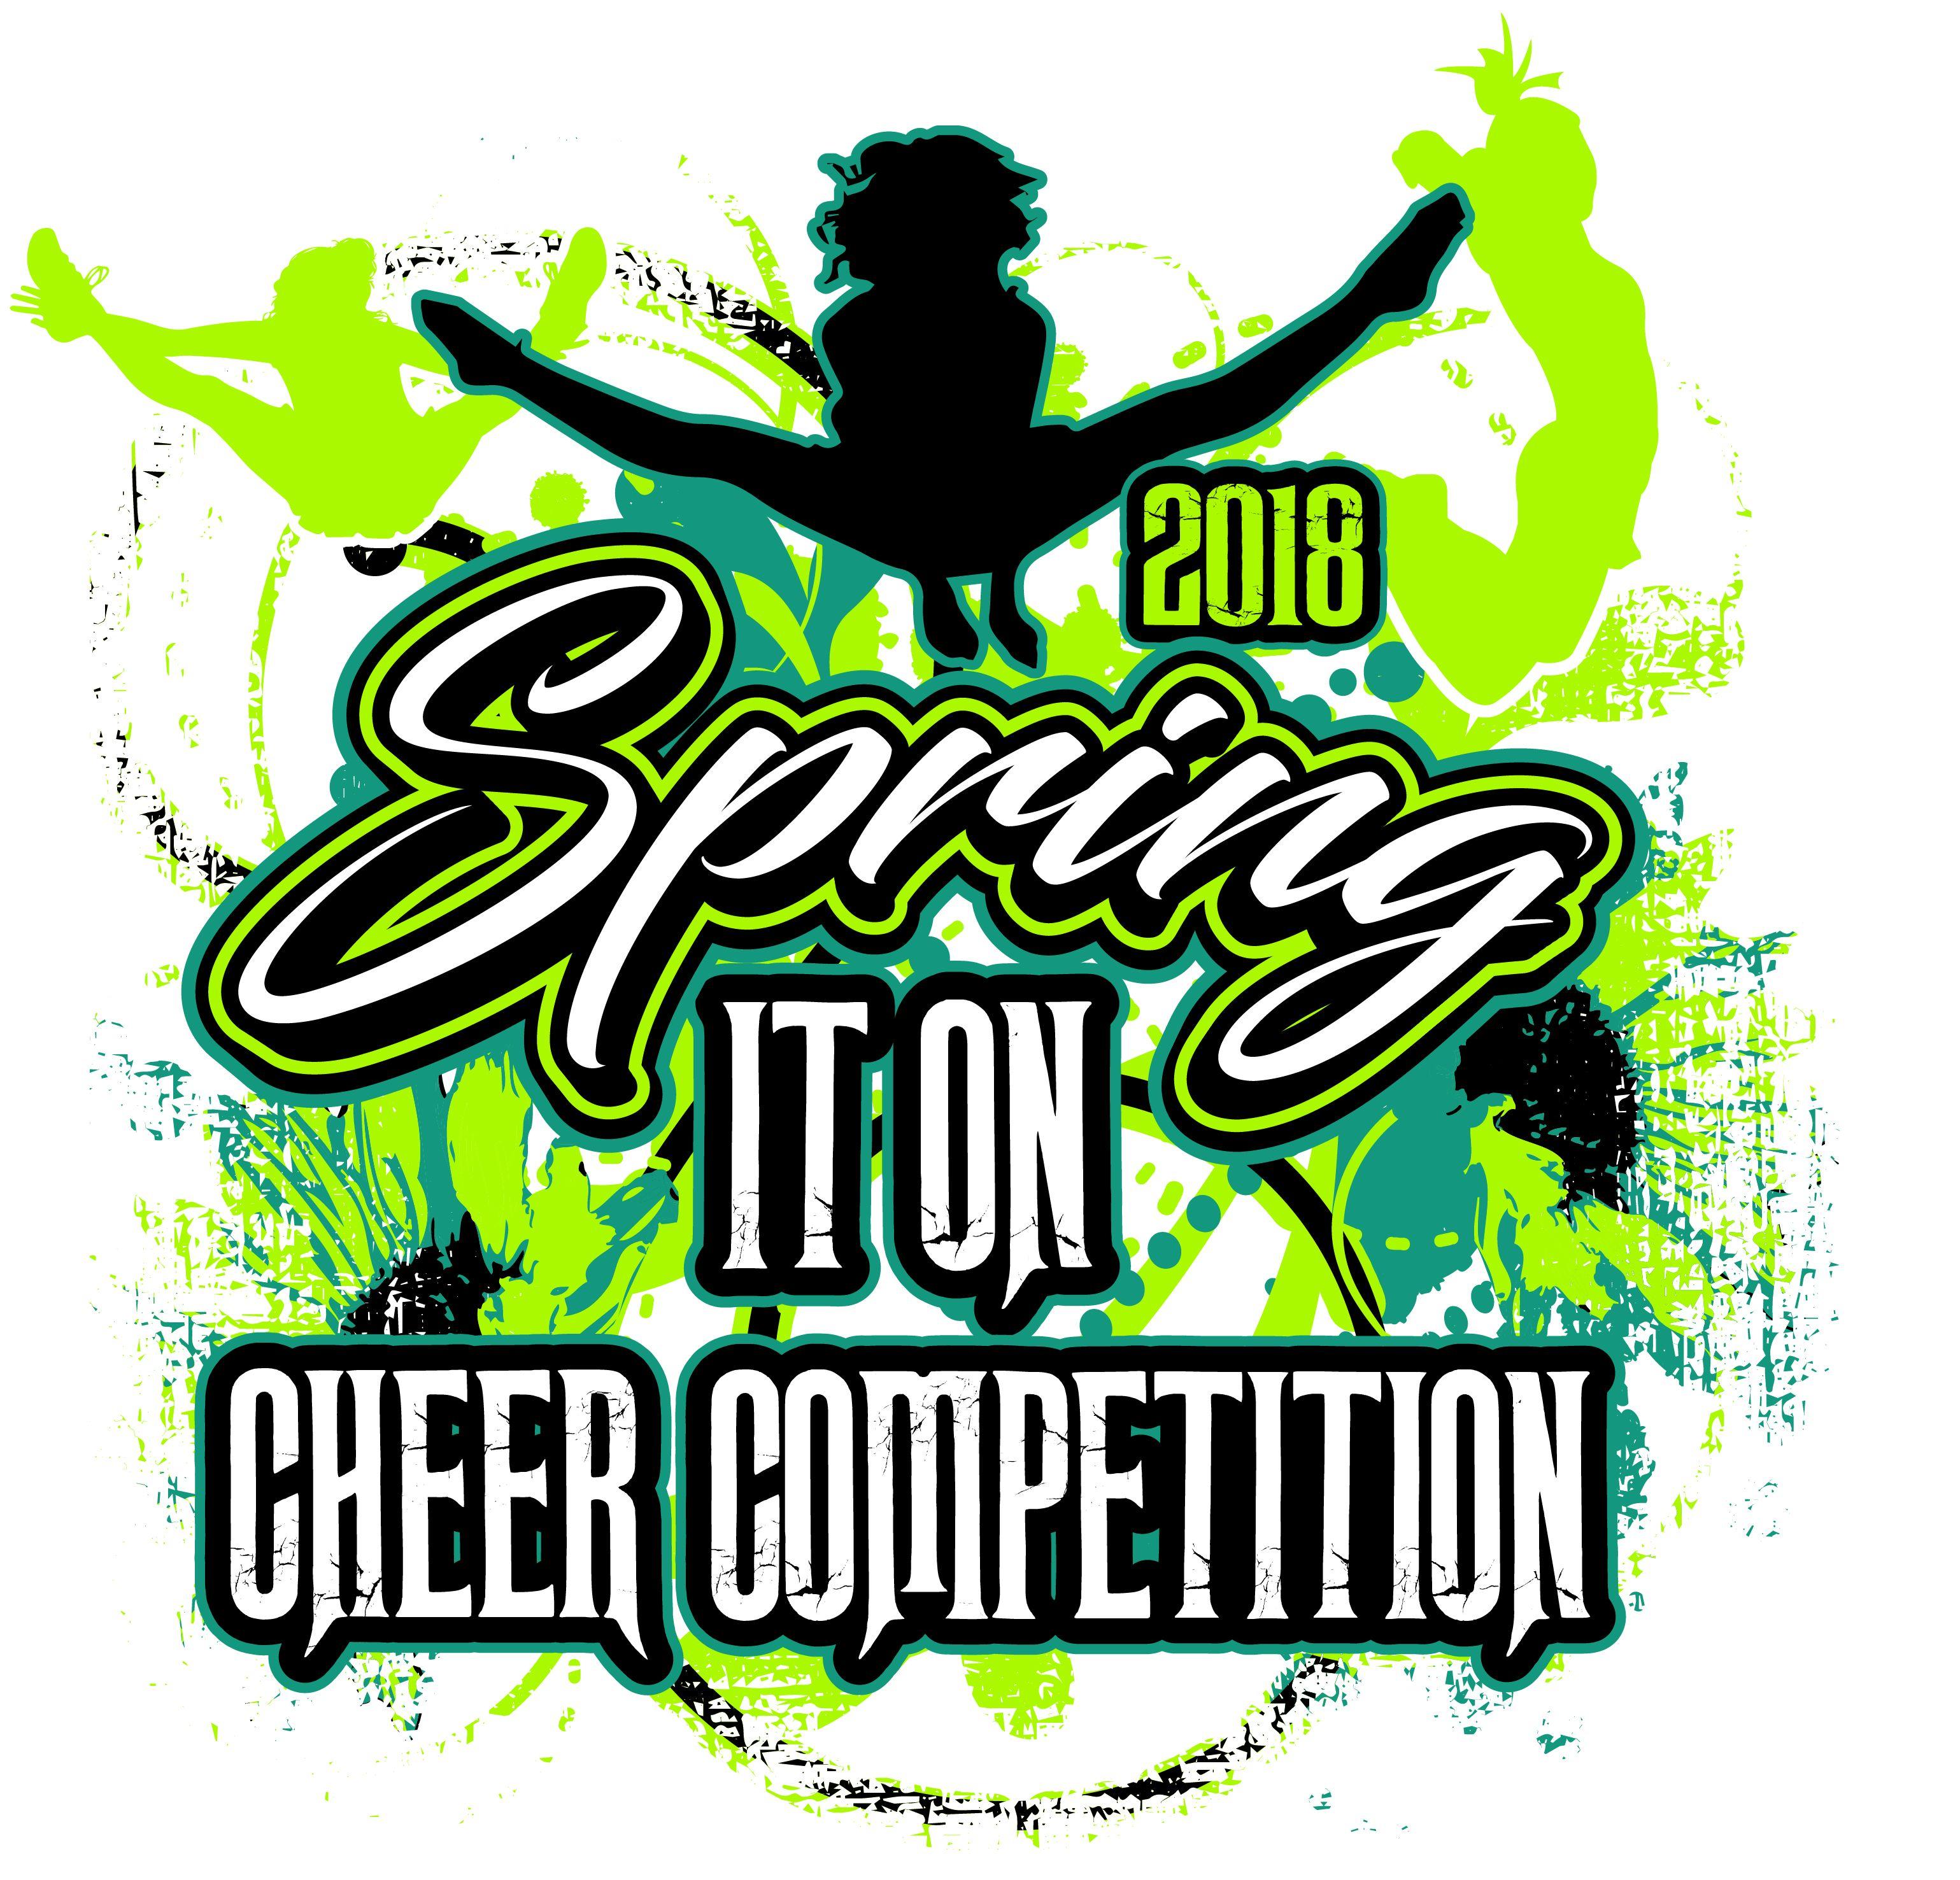 Cheer Logo - SPRING IT ON CHEER COMPETITION 2018 t-shirt vector logo design for ...